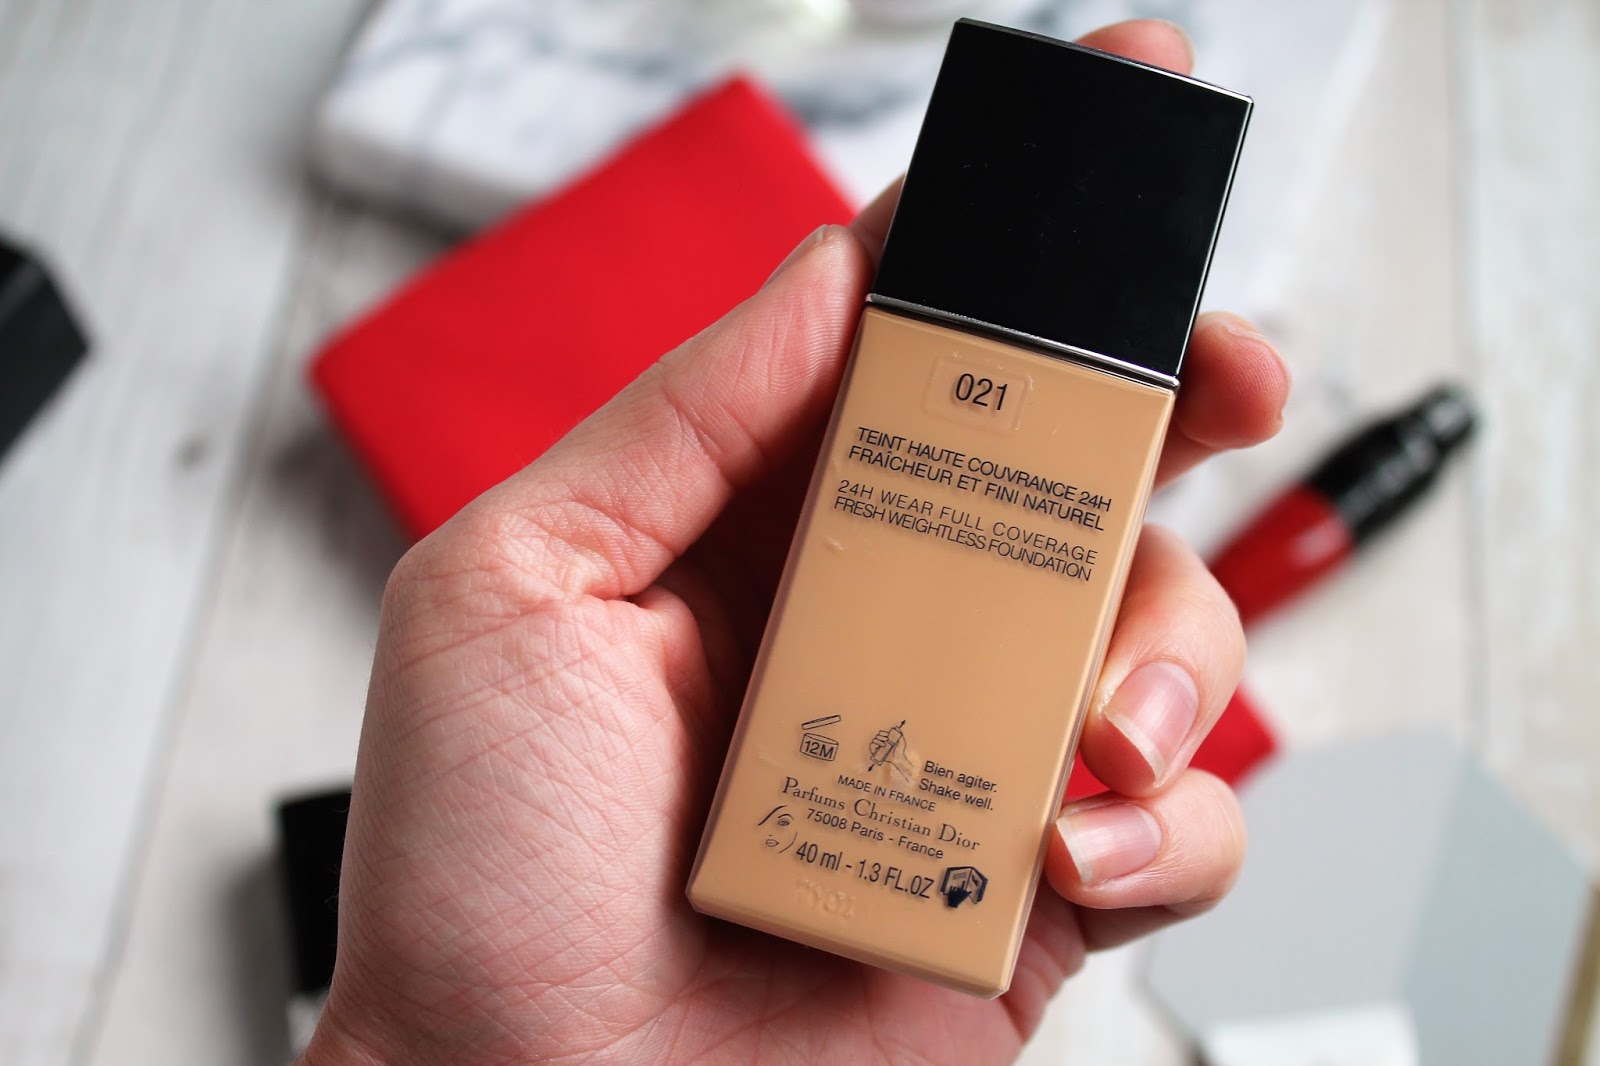 dior forever undercover foundation swatches